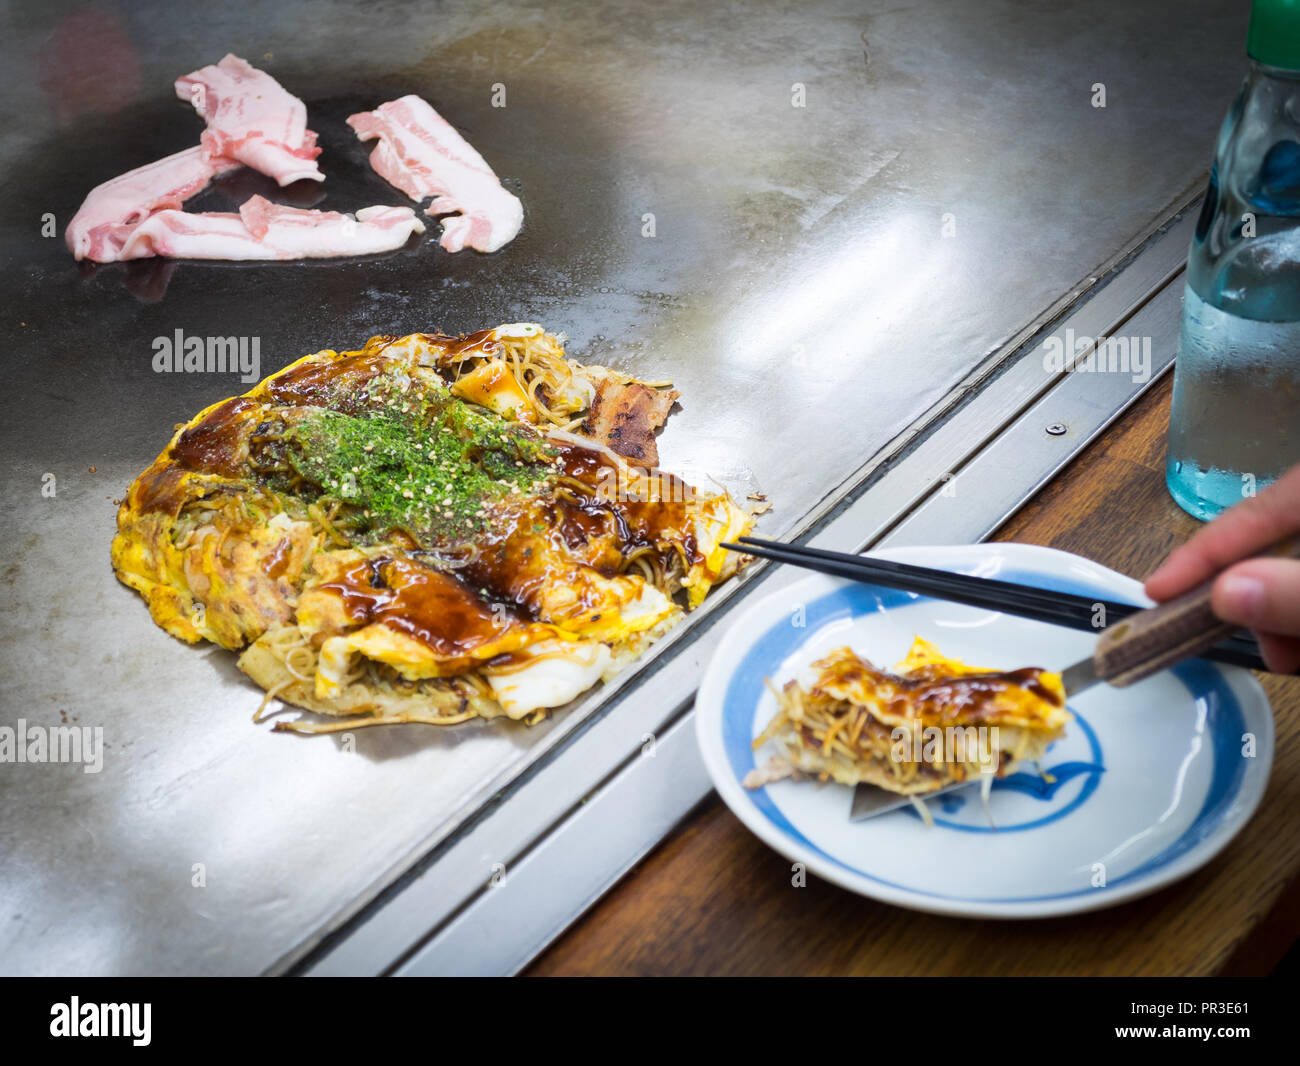 Hiroshima-style okonomiyaki with cabbage, udon noodles, squid, bacon, and beef on a hot grill at Okonomimura in Hiroshima, Japan. Stock Photo